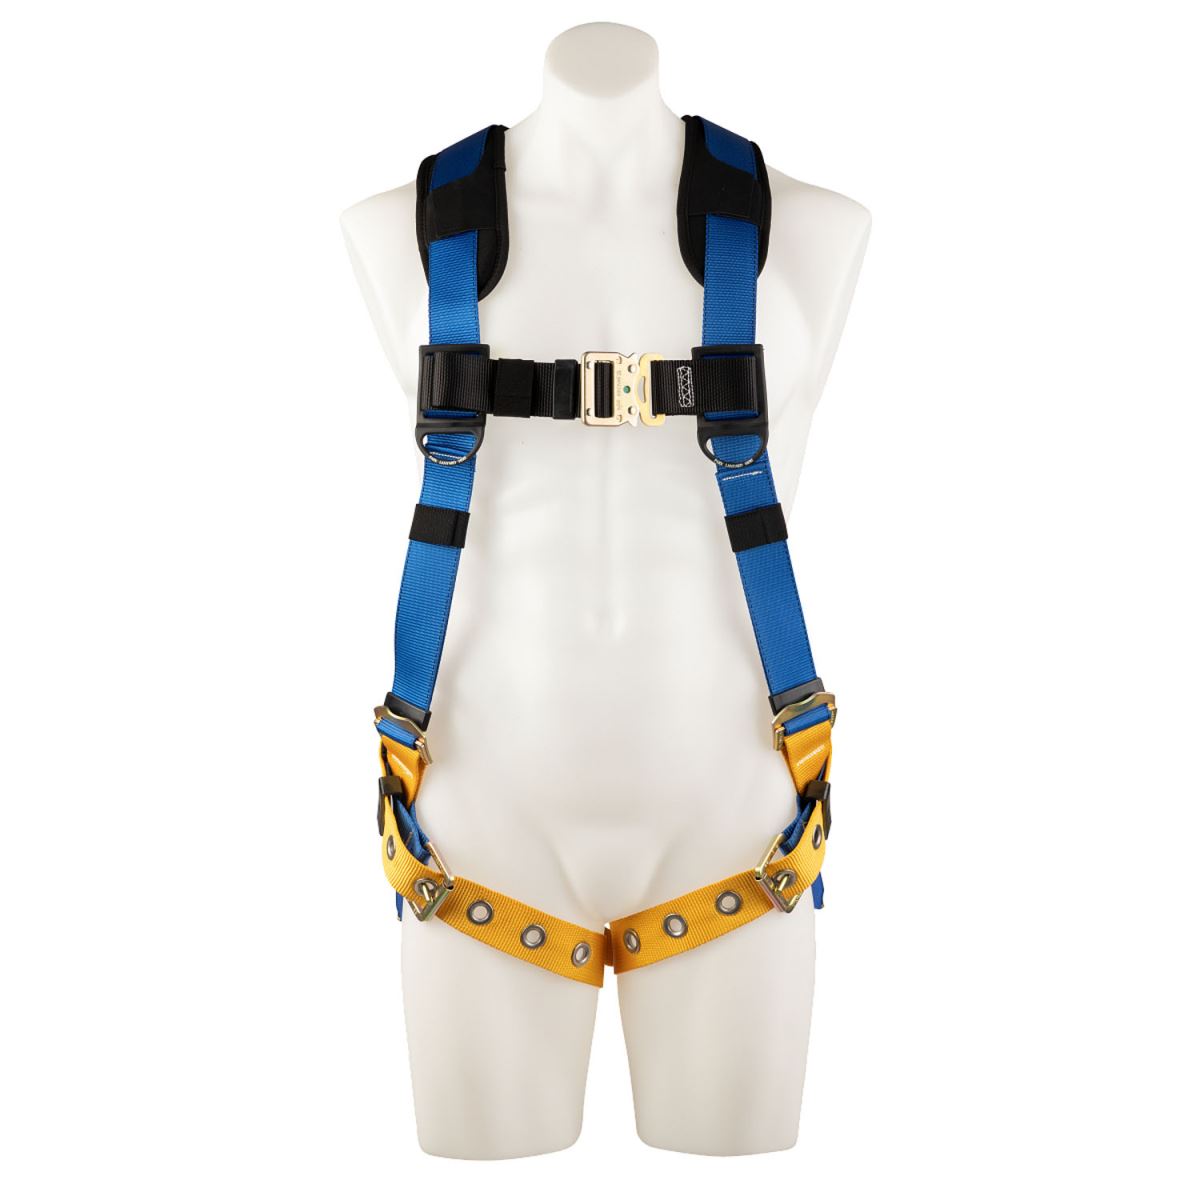 LITEFIT PLUS STANDARD HARNESS WITH BACK D-RING (MULTIPLE SIZES AVAILABLE)